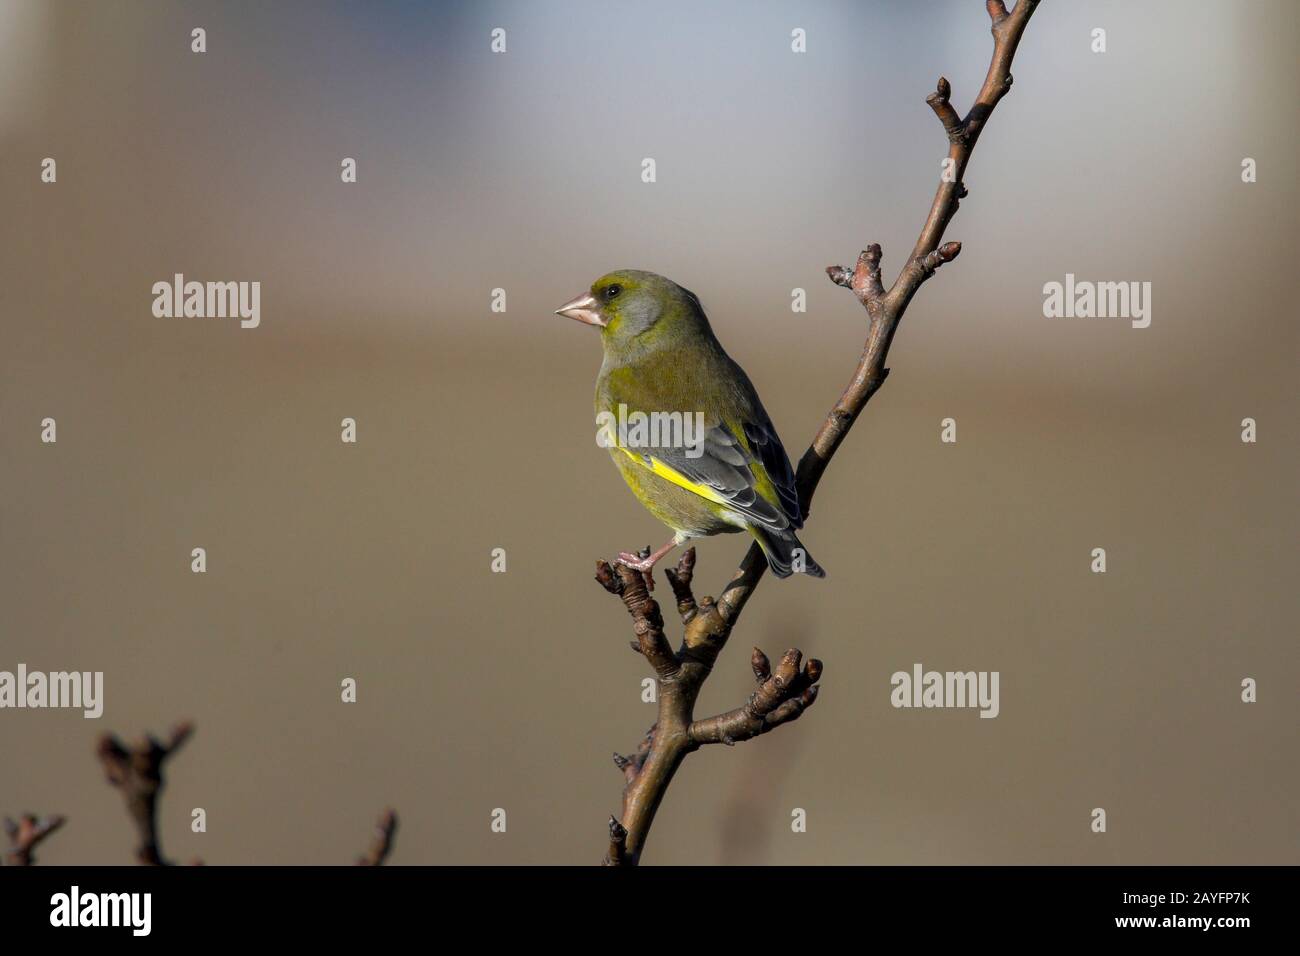 Greenfinch Caruelis chloris (Fringillidae) perching on a twig with out of focus backgeound, Northamptonshire, Engloand UK. Stock Photo